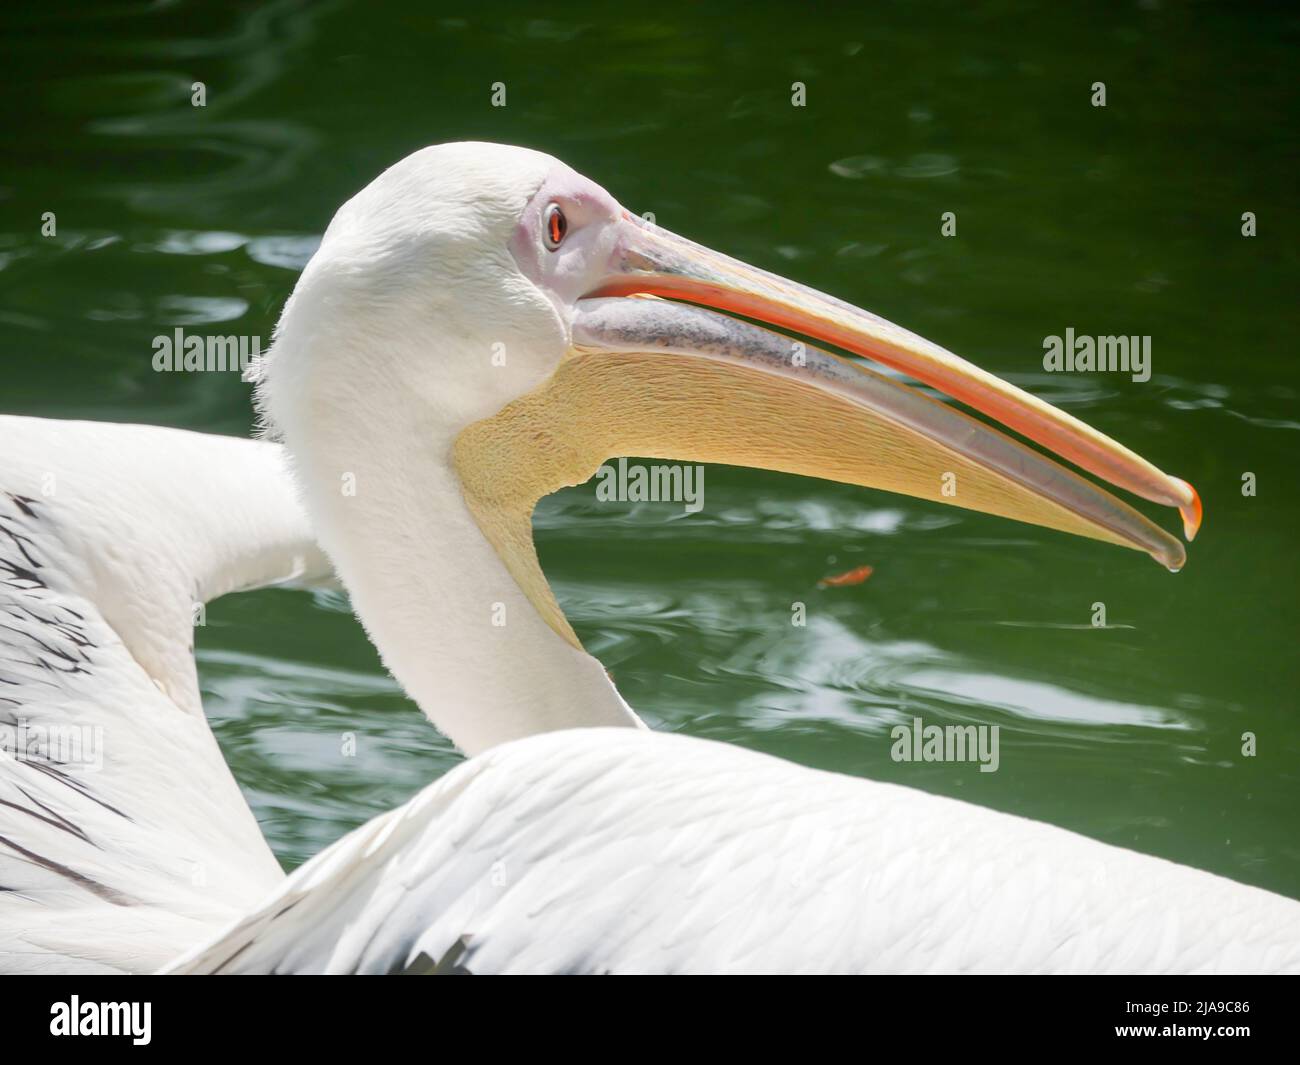 Pelican, Big water birds close up picture. pelicans are characterized by a long beak and a large throat pouch. Stock Photo